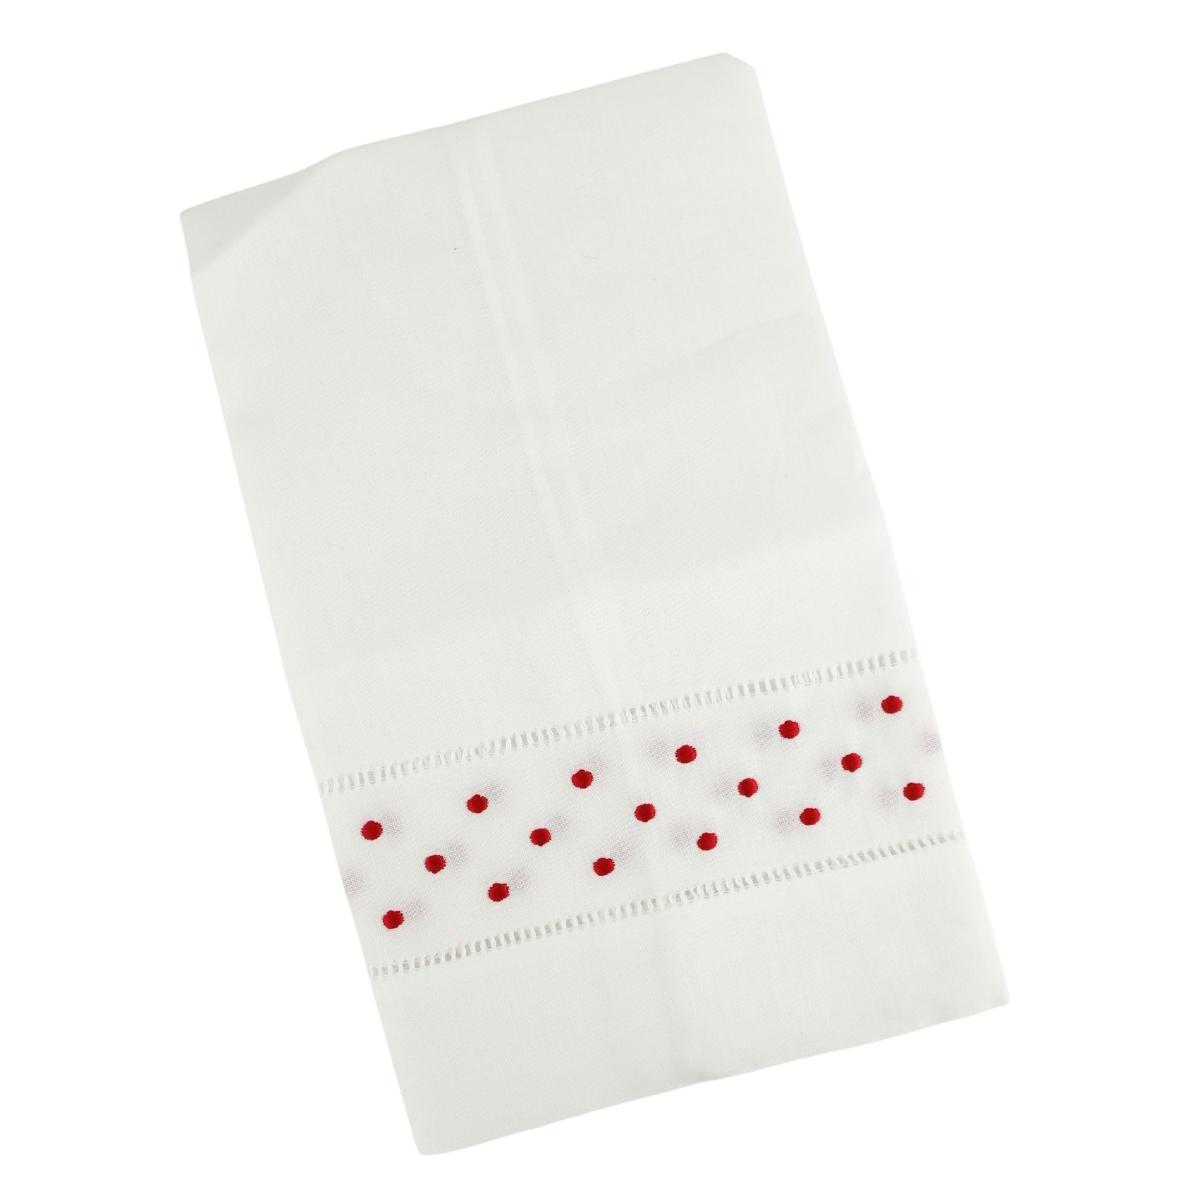 Do you carry linen white blank tea towels?